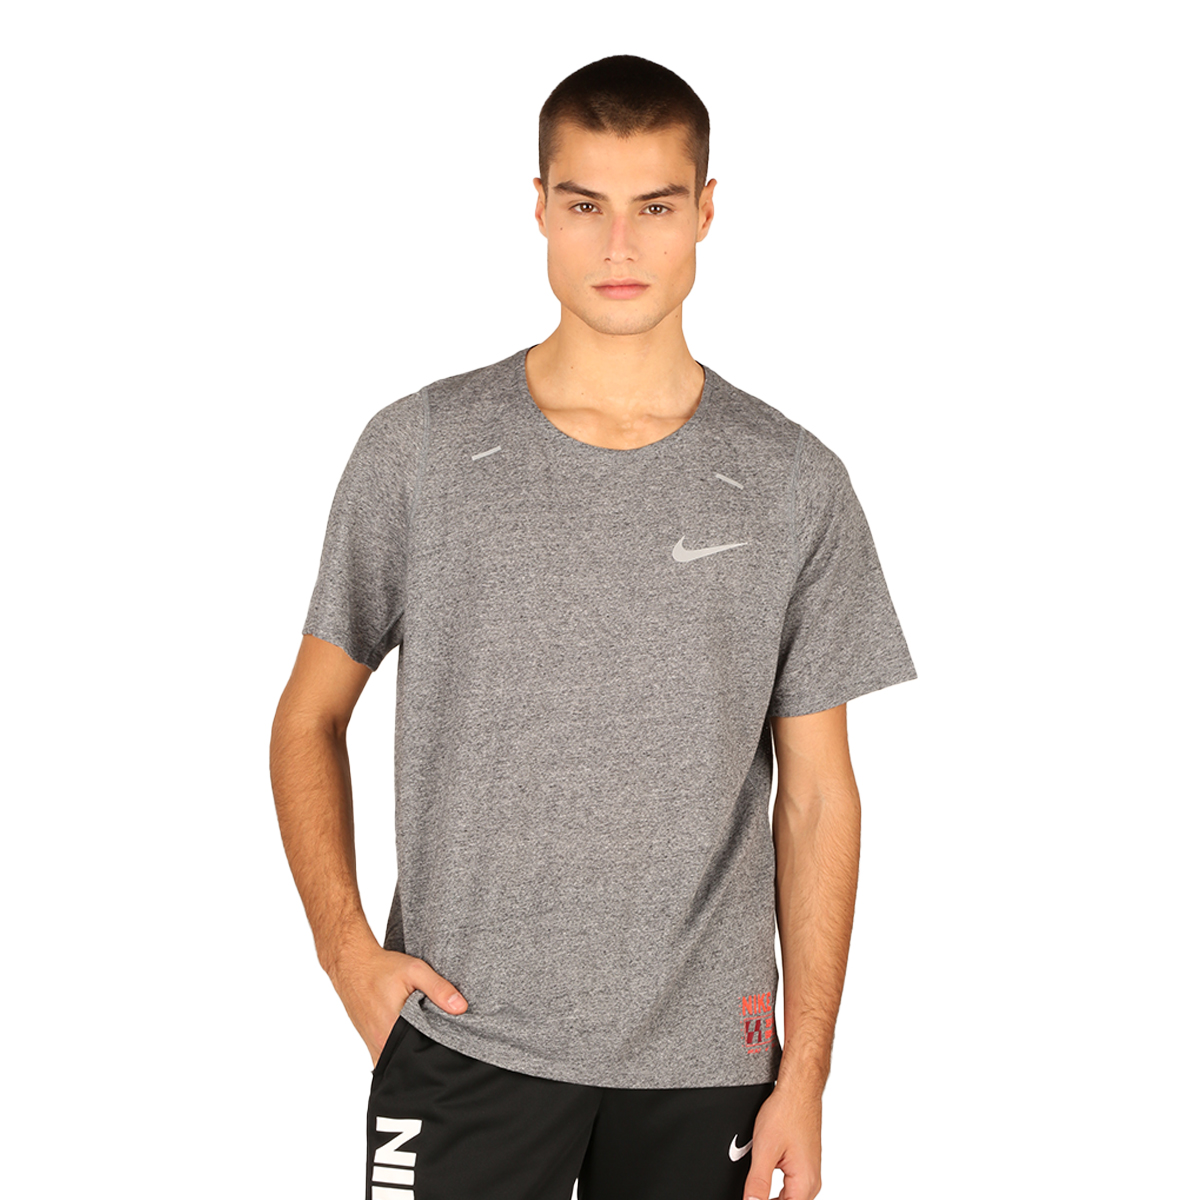 Remera Nike Rise 365 Future Fast,  image number null